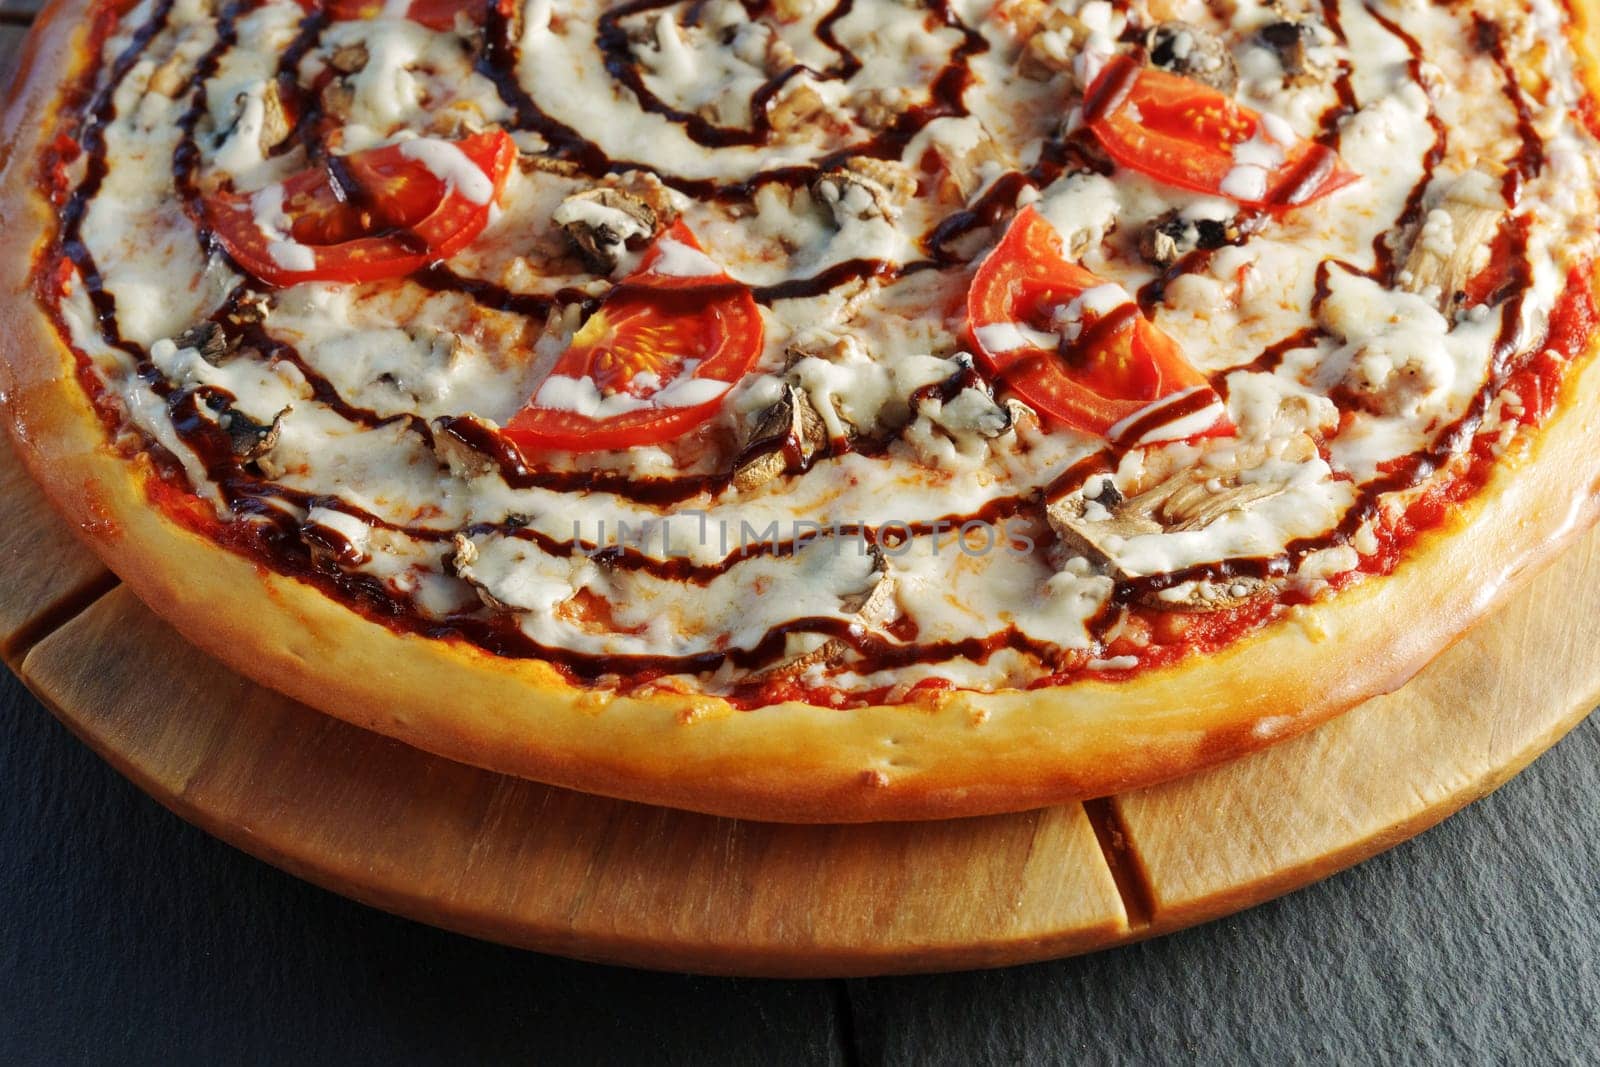 Freshly baked pizza with ripe tomatoes, earthy mushrooms, and melted cheese, ready to be enjoyed.